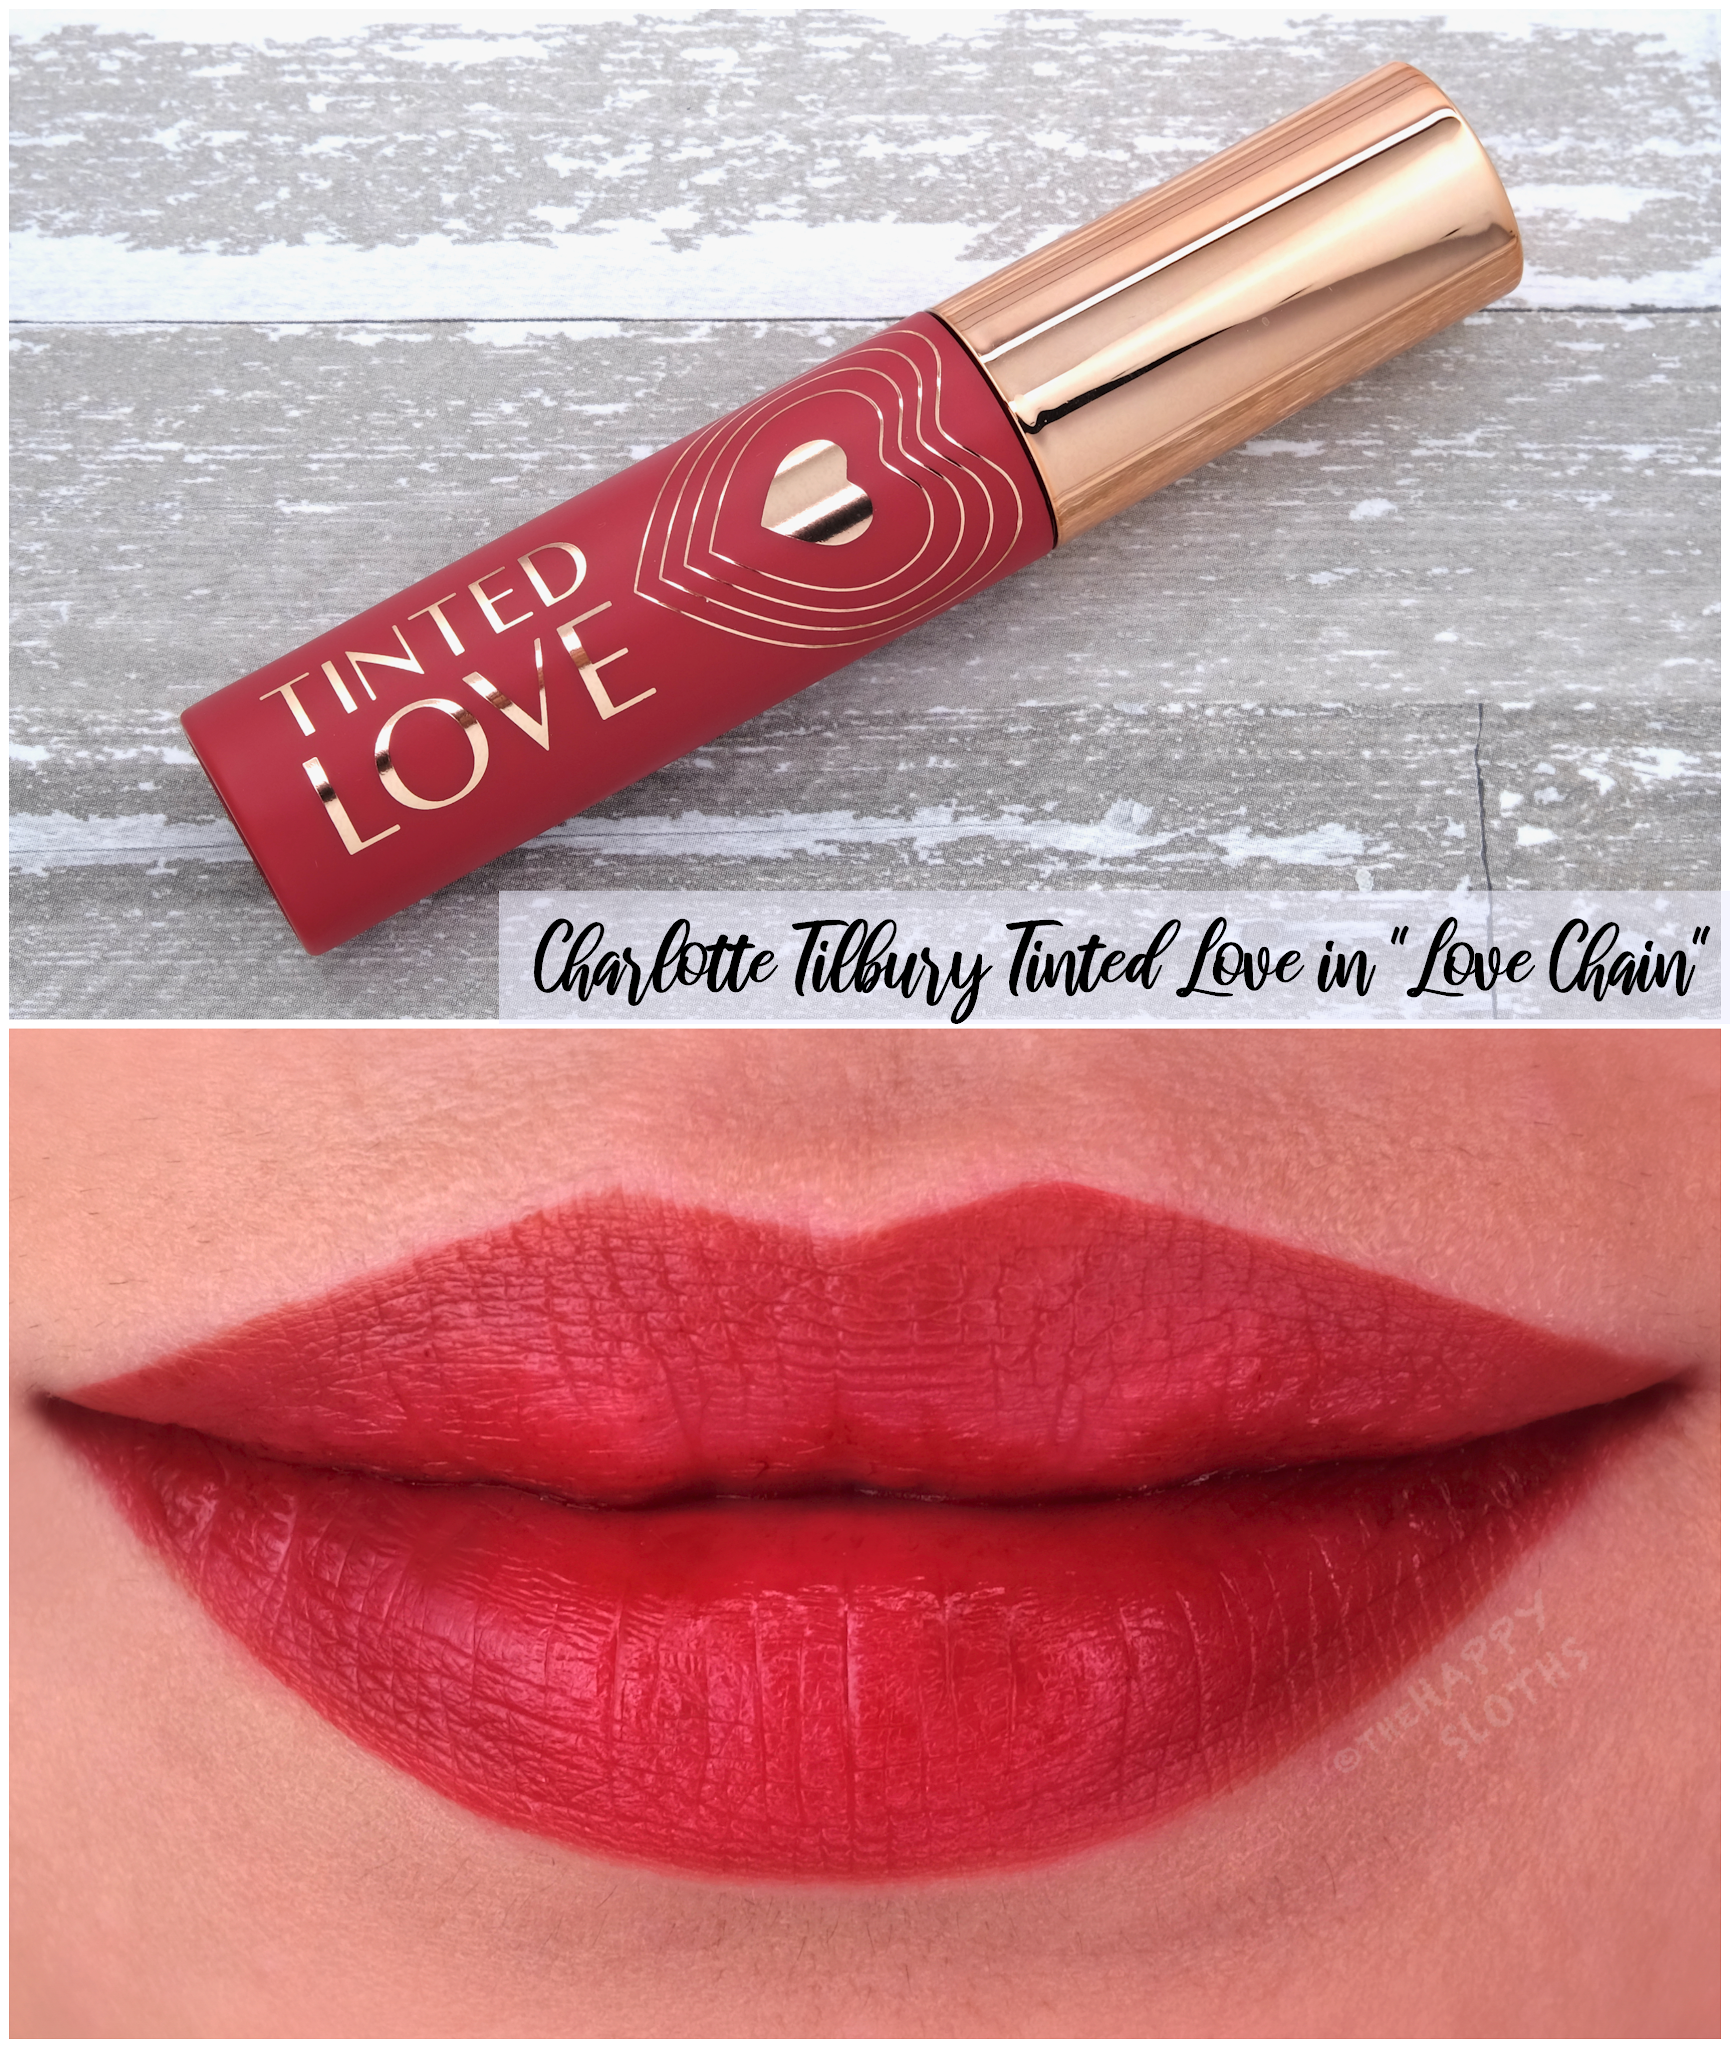 Charlotte Tilbury | Tinted Love Lip & Cheek Tint in "Love Chain": Review and Swatches